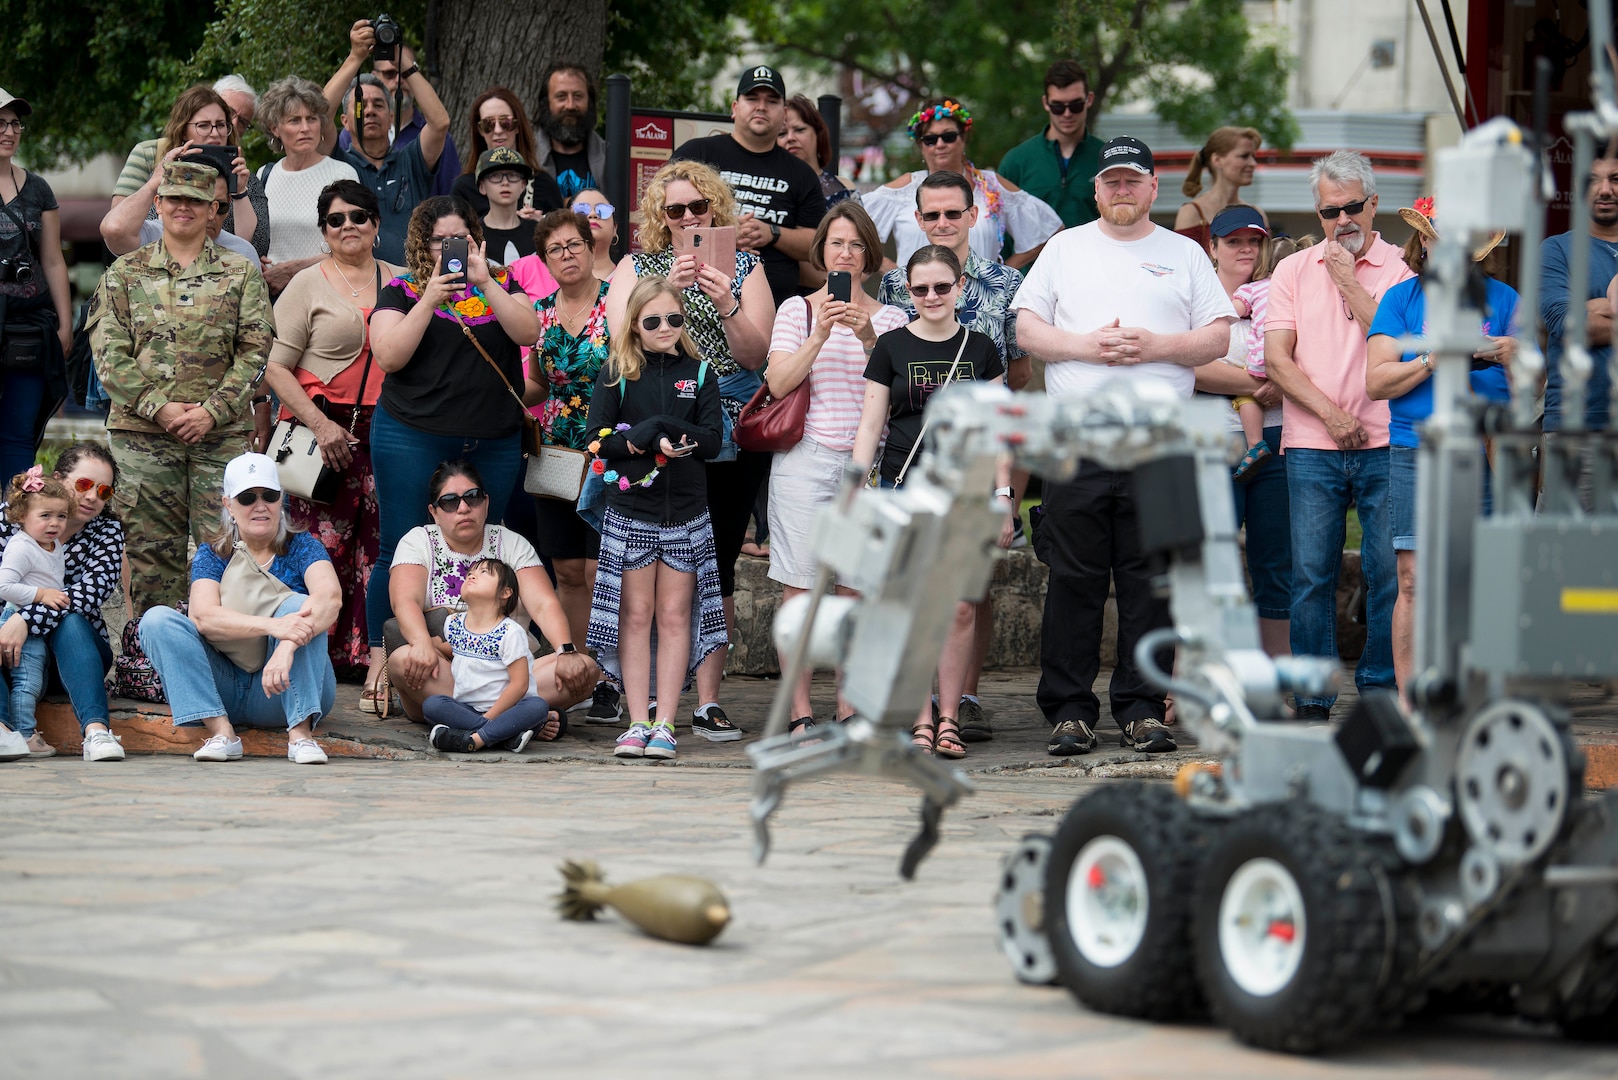 The Air Force Day at the Alamo audience watches a robot operated by the 502nd Civil Engineer Squadron, Explosive Ordnance Disposal, reach for a inert munition during an equipment and methods for bomb detection and disposal demonstration during San Antonio’s Fiesta Air Force Day at the Alamo, April 22, 2019. From its beginning in 1891, Fiesta has grown into an annual celebration that includes civic and military observances, street and river parades, exhibits, pilgrimages and memorials.